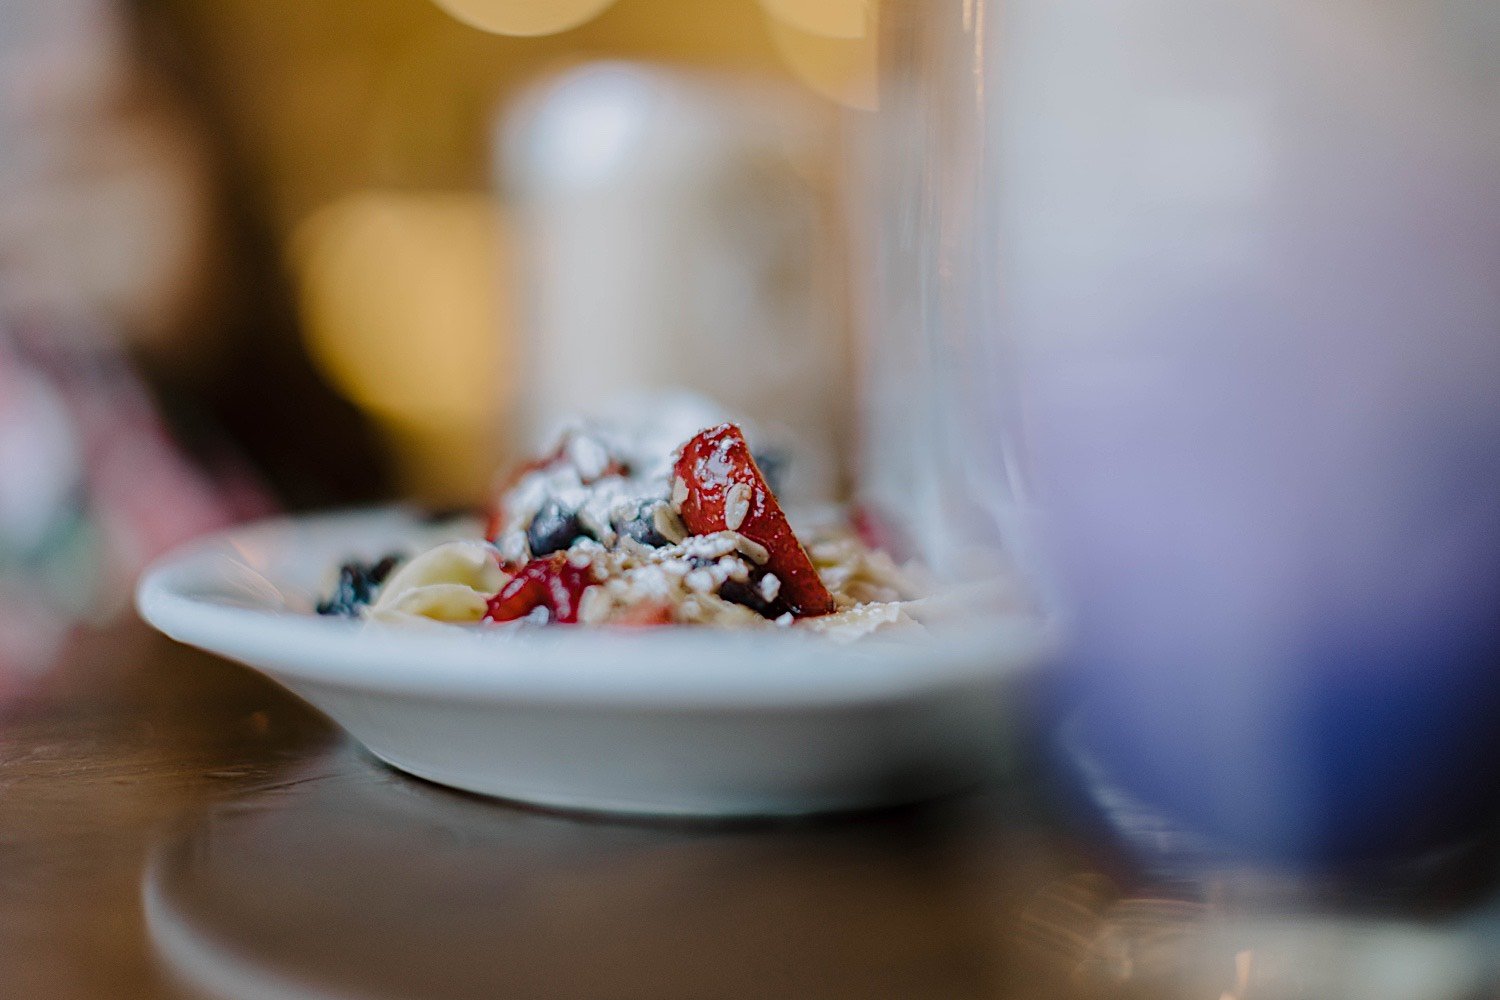 Strawberries, blueberries and oatmeal on a plate with blurry surroundings